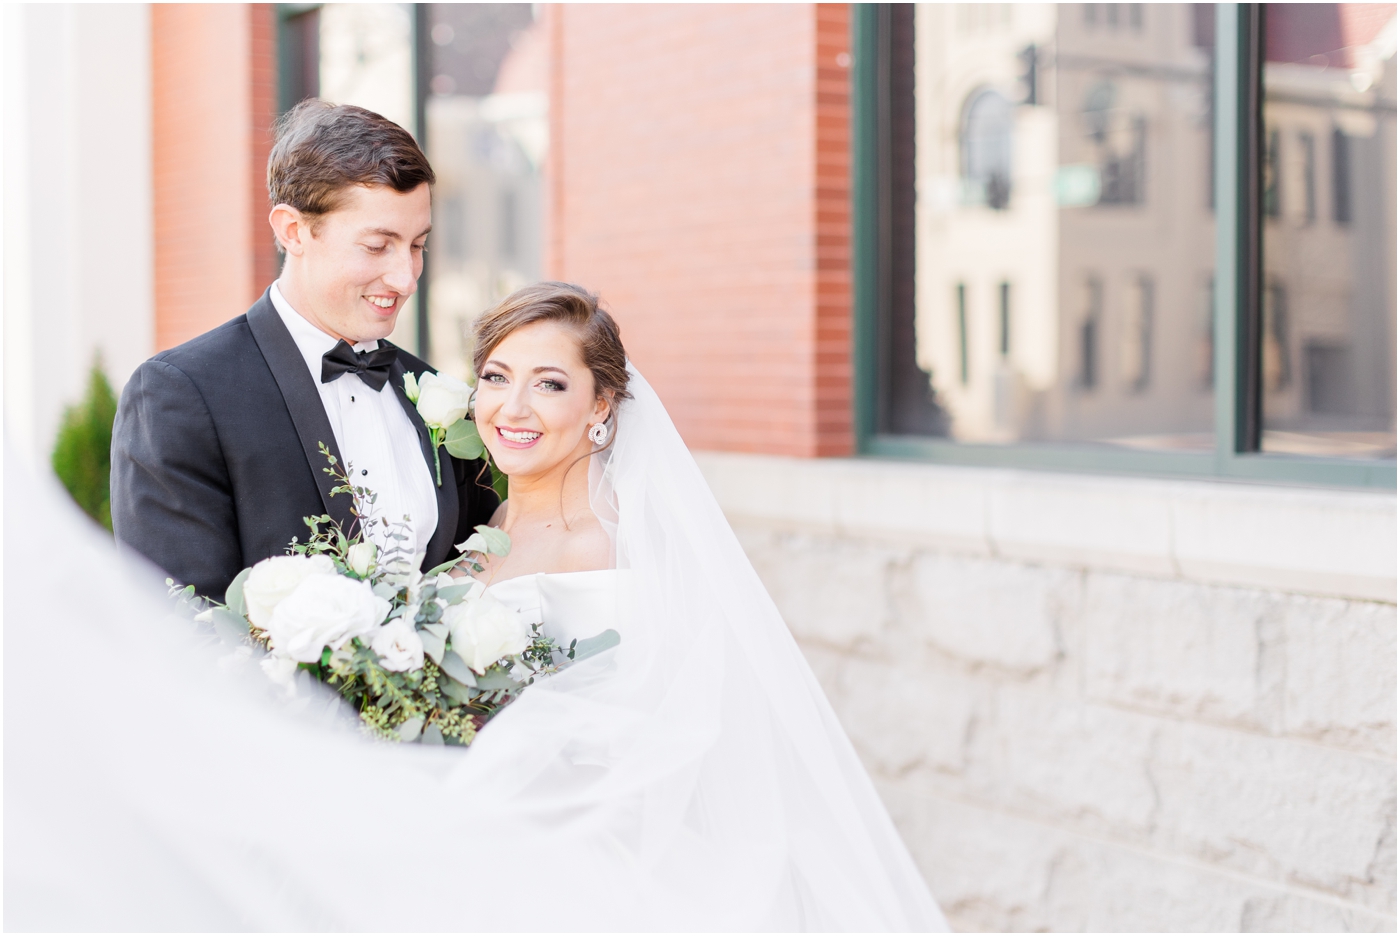 Bleckley Station Wedding in Anderson SC Wedding Photographer